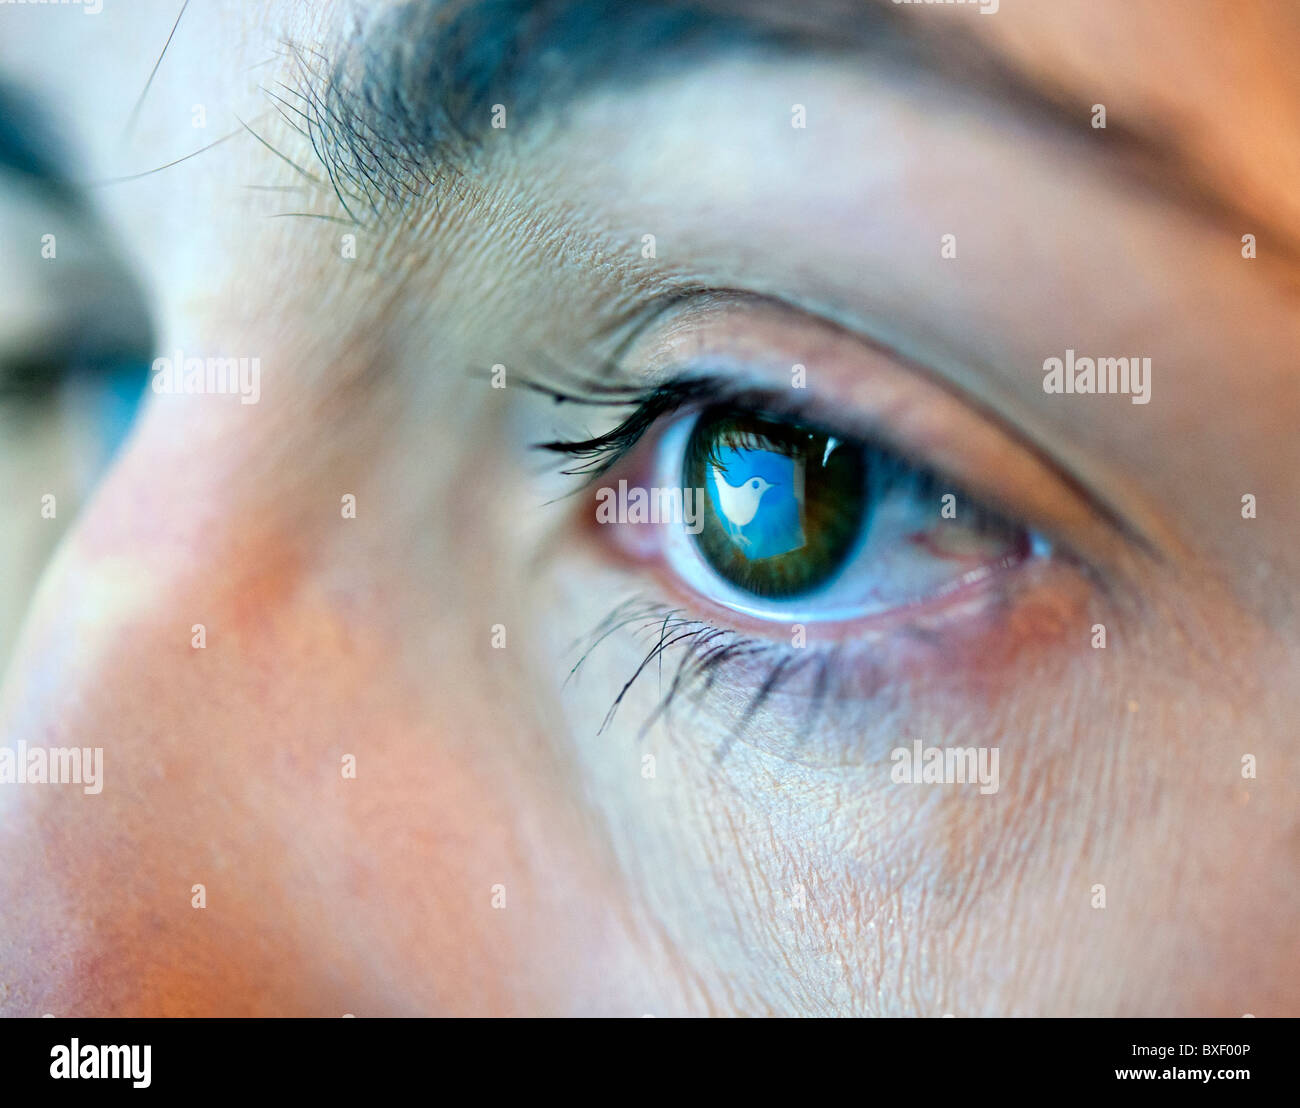 Reflection in an eye of logo from Twitter blogging website Stock Photo